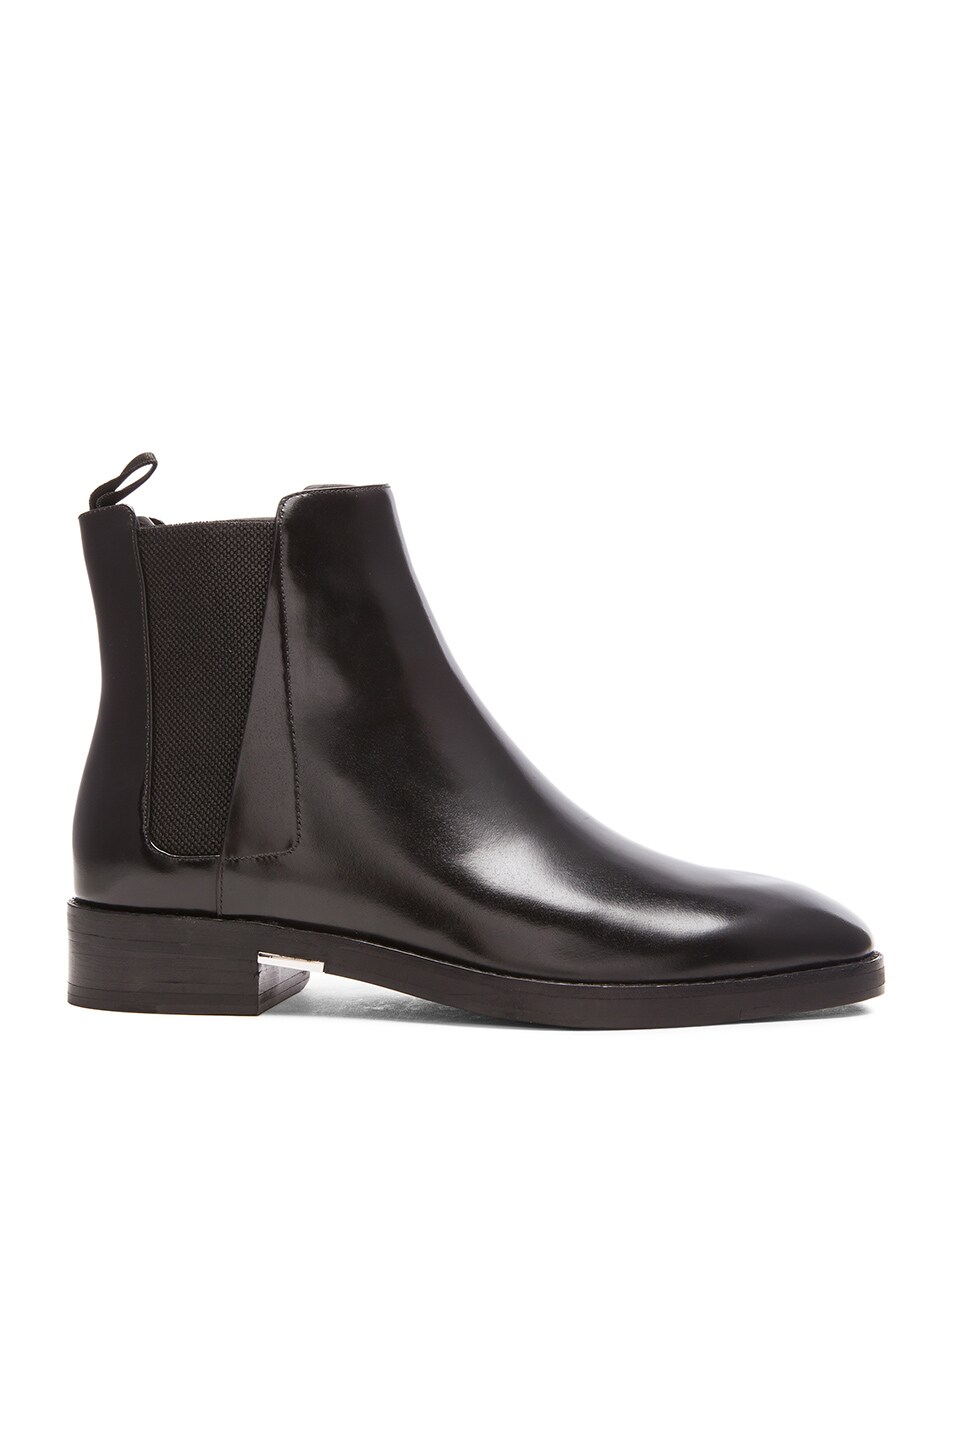 Image 1 of Alexander Wang Fia Burnished Calf Chelsea Leather Boots in Black